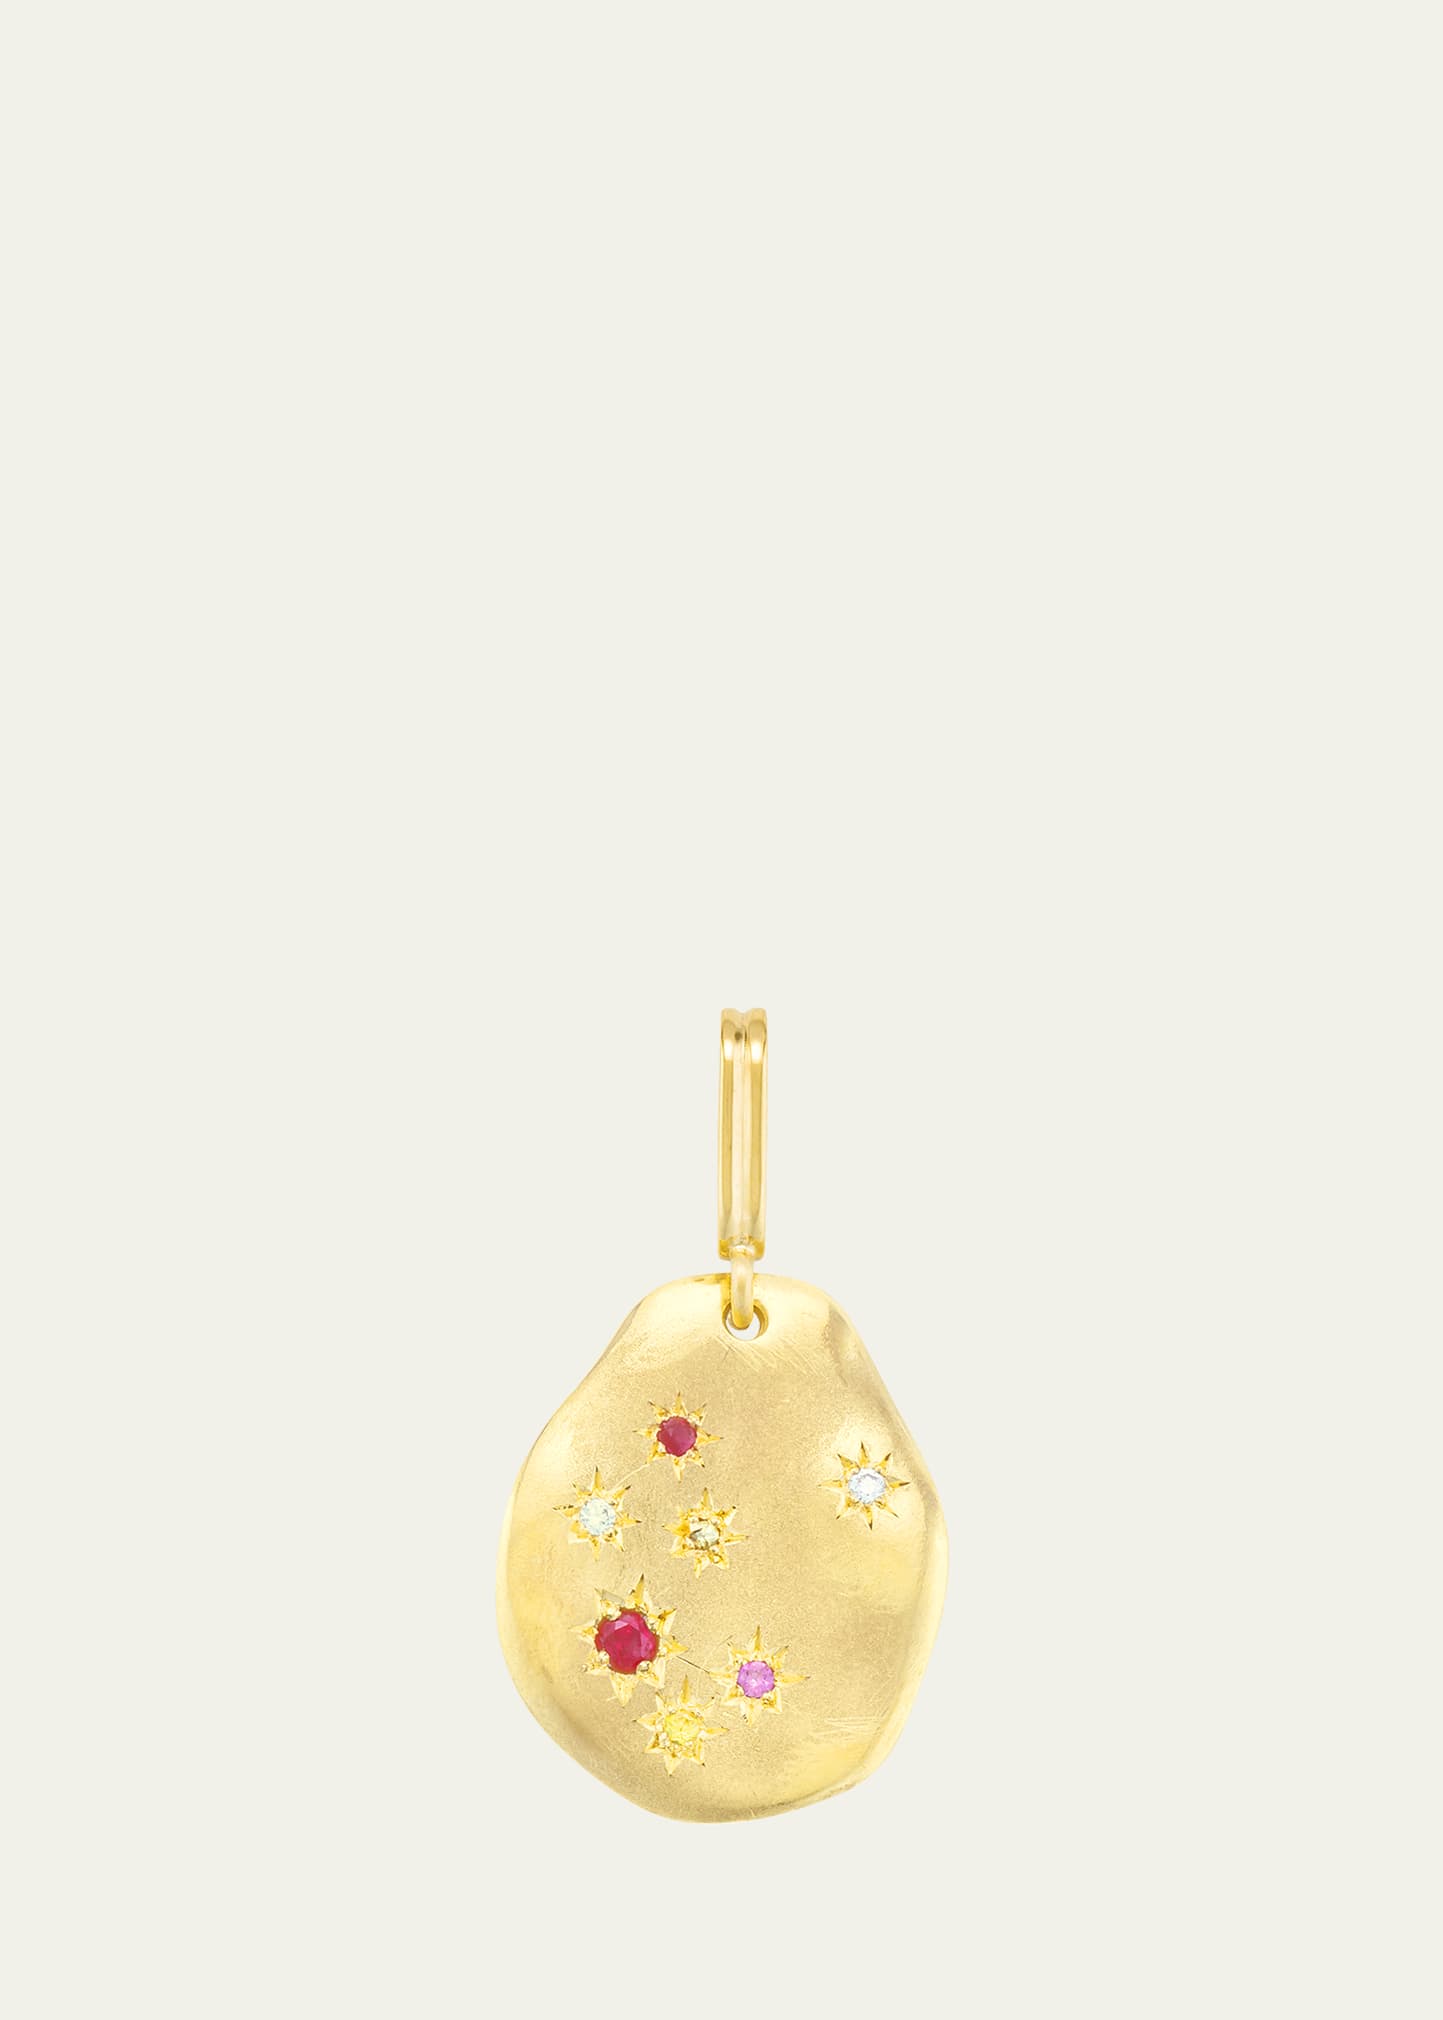 18K Yellow Gold Starry Night Medal Charm with Diamonds, Colored Sapphires and Rubies